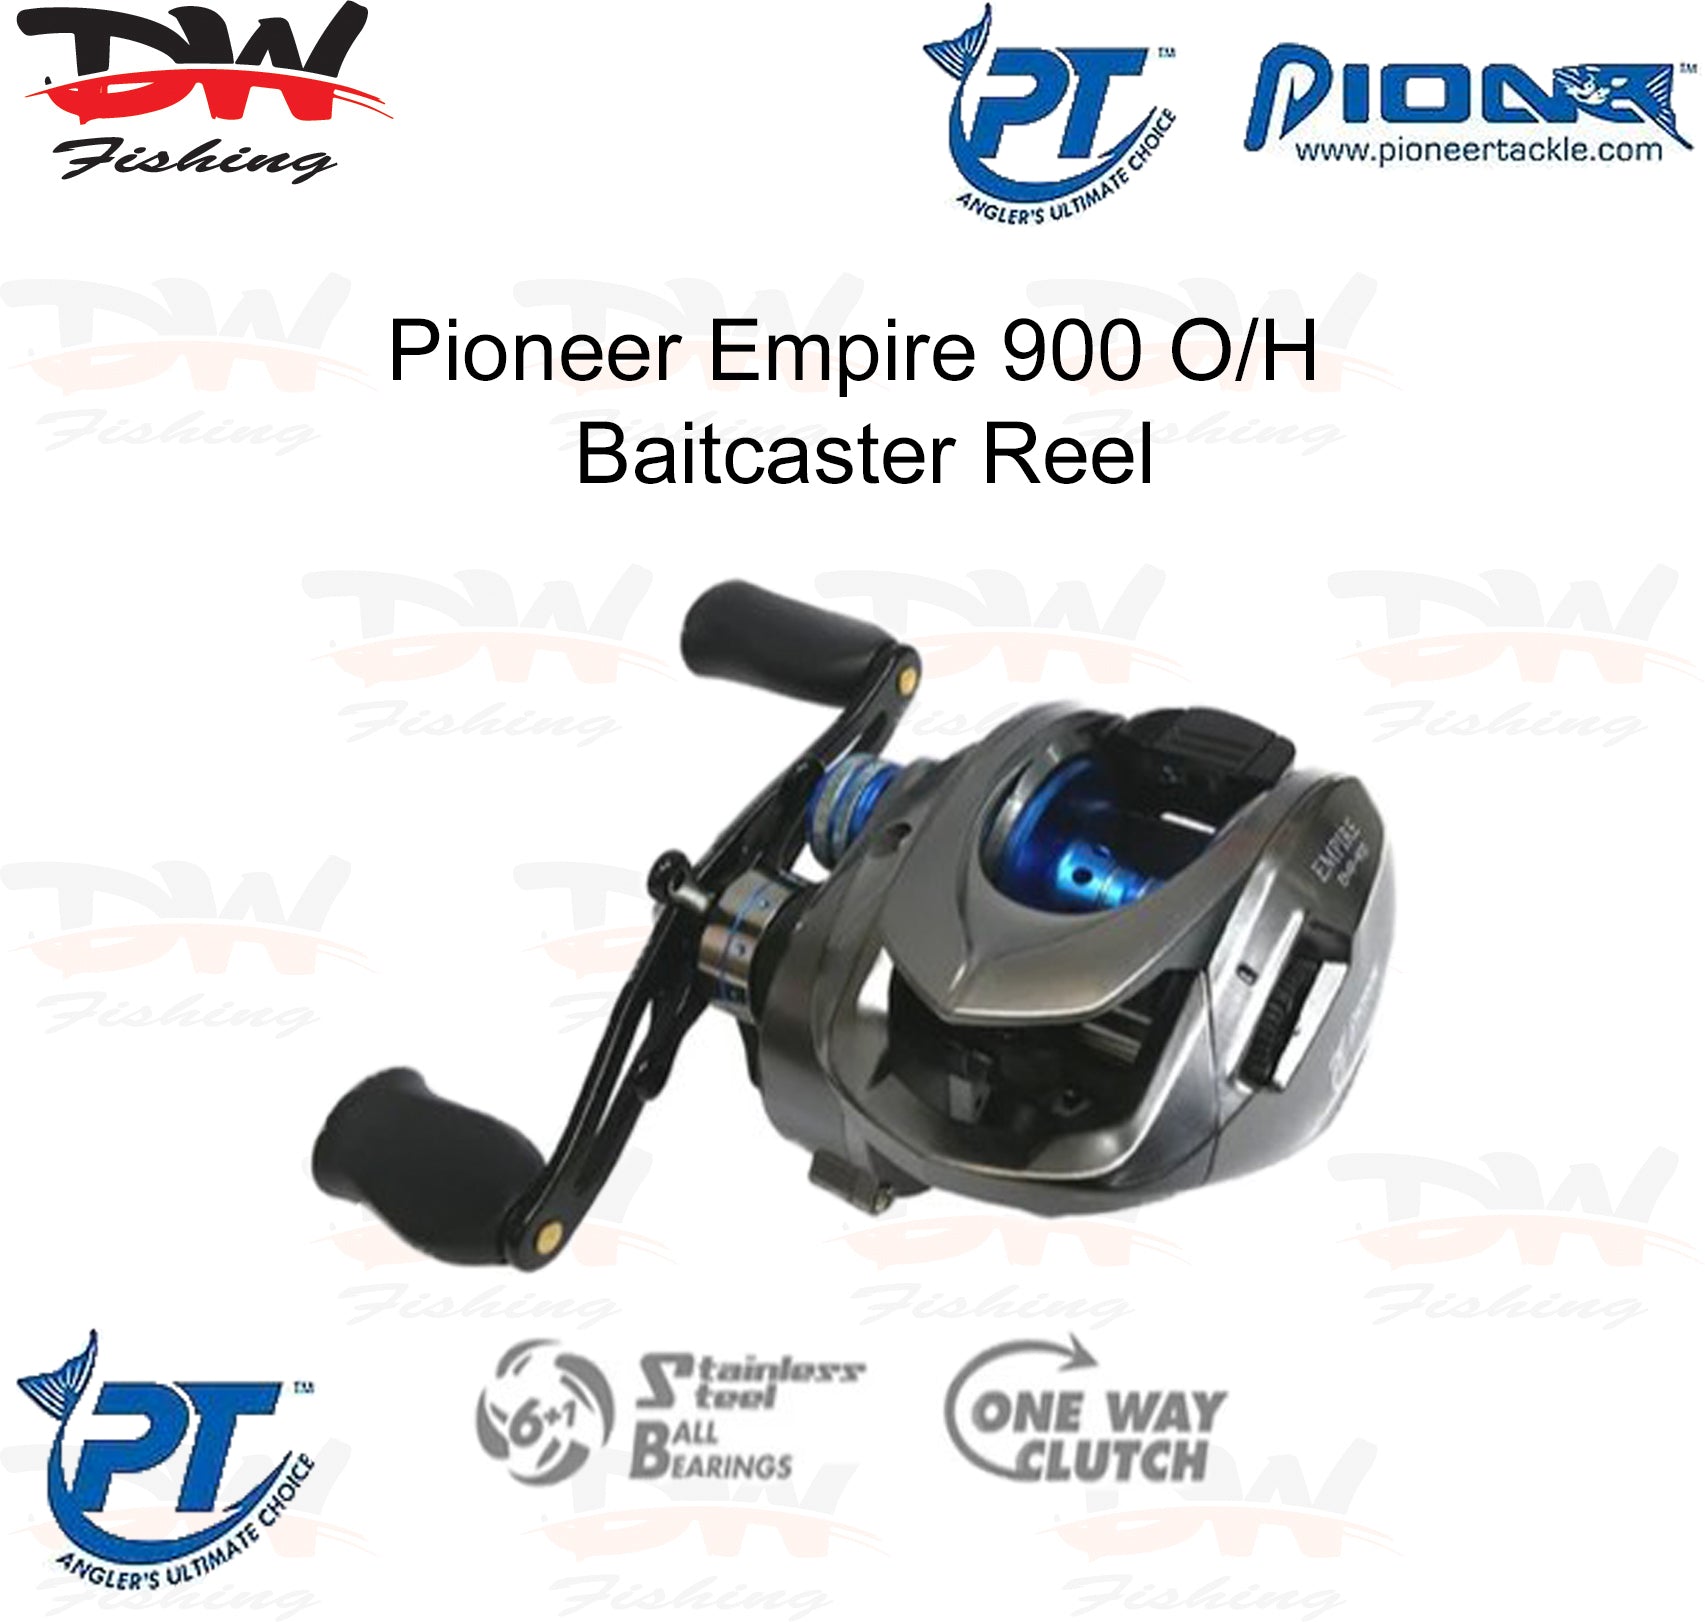 Pioneer Bait caster reel Empire series 900 B/C Cover shot with title